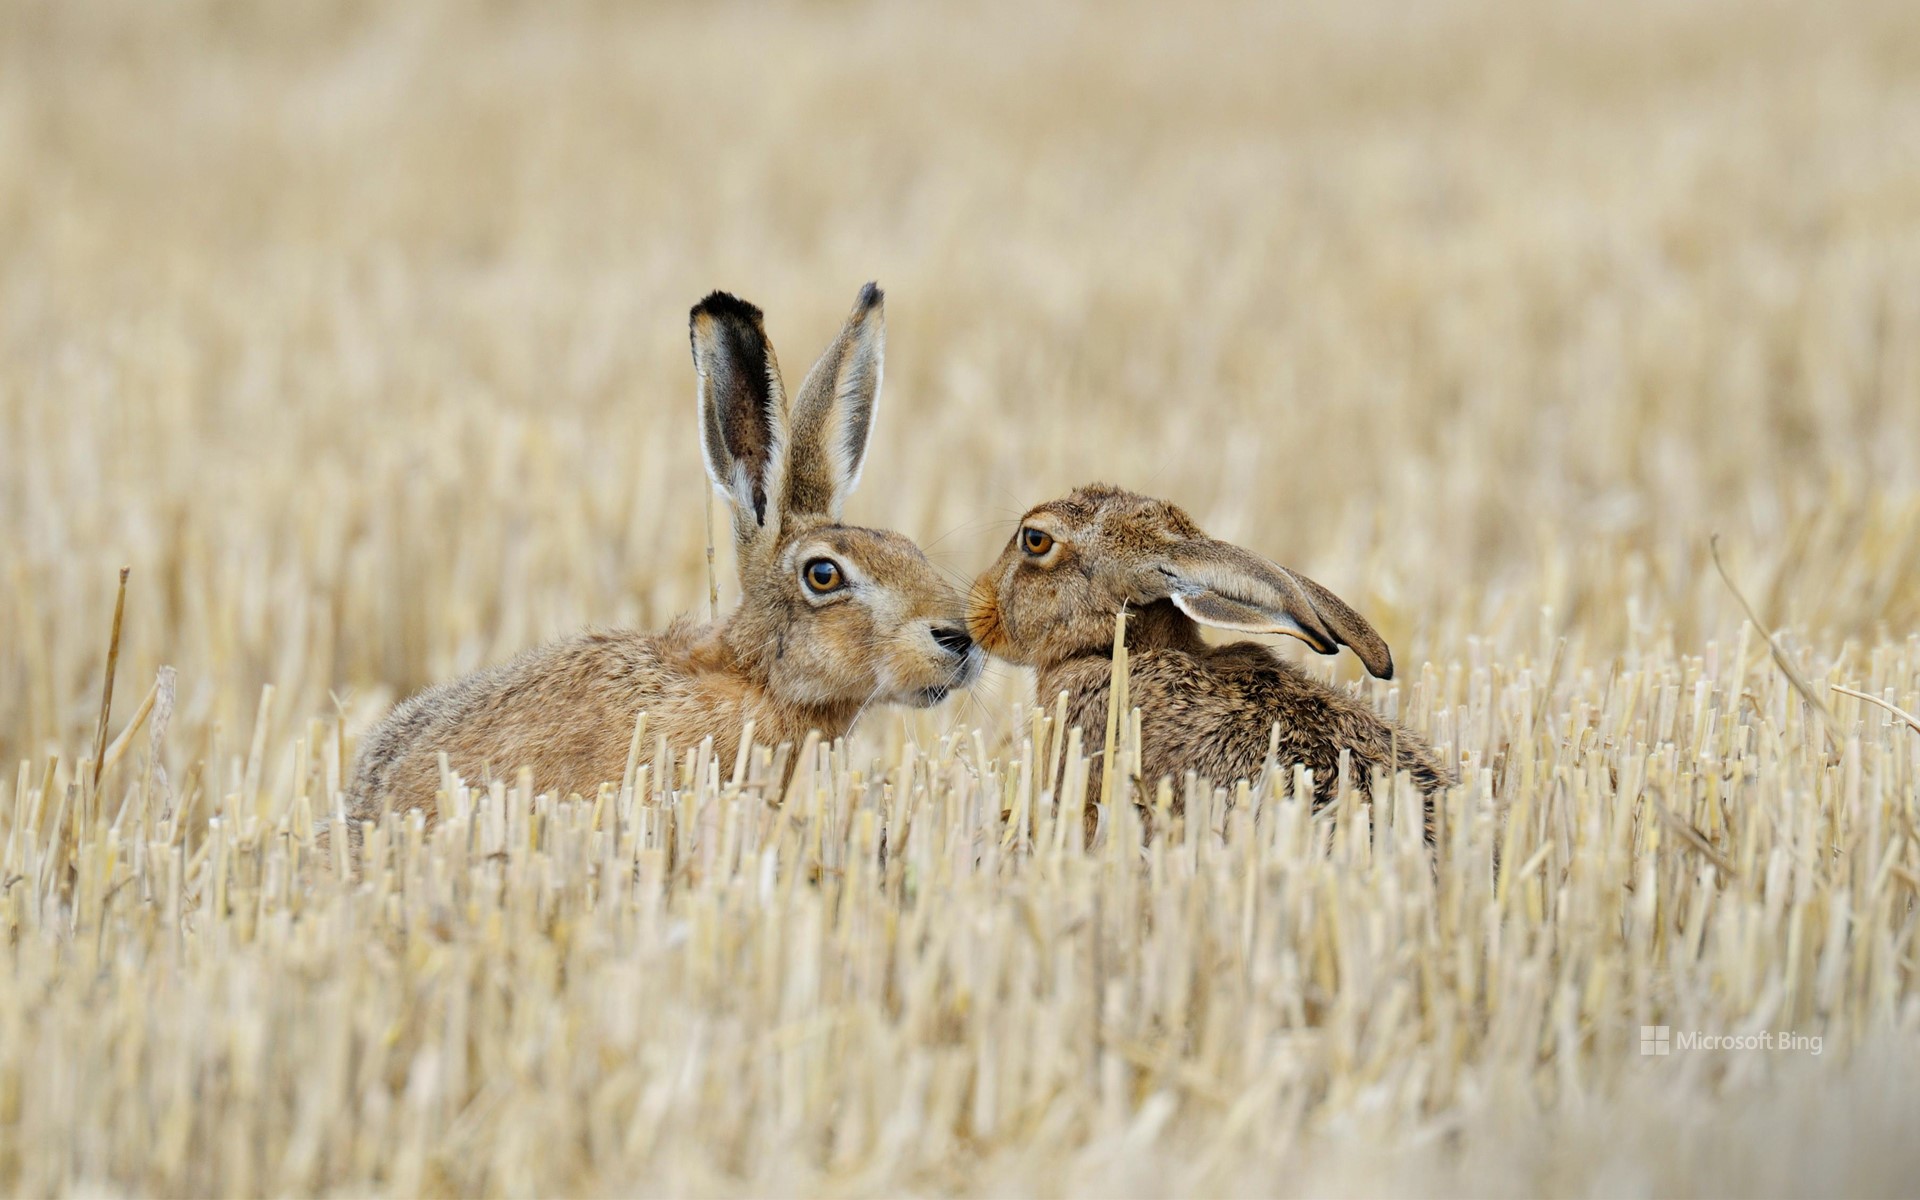 Brown hares on a stubble field, Germany